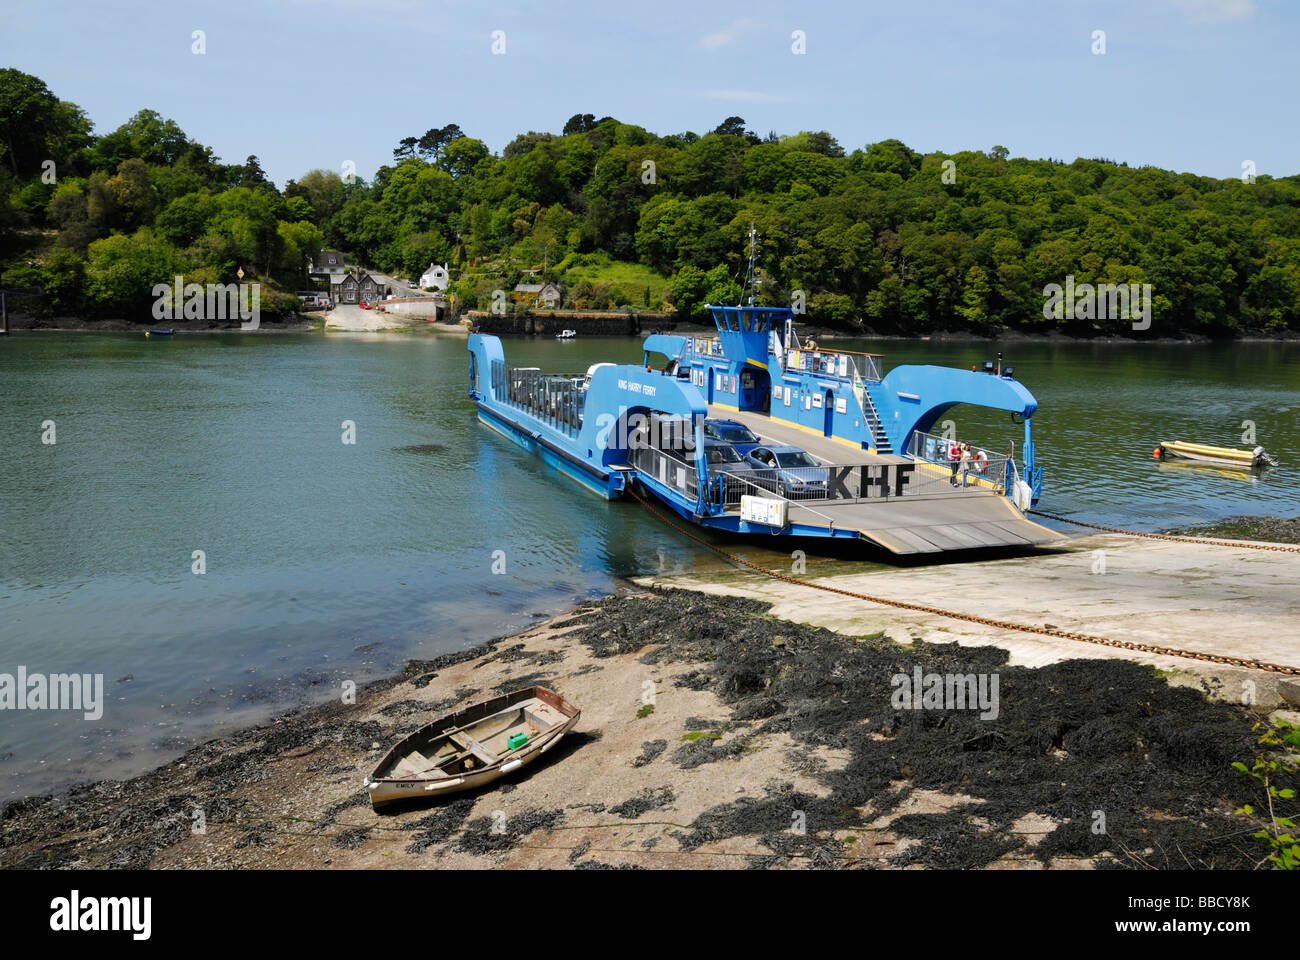 King Harry Ferry across the river Fal, Cornwall, UK Stock Photo